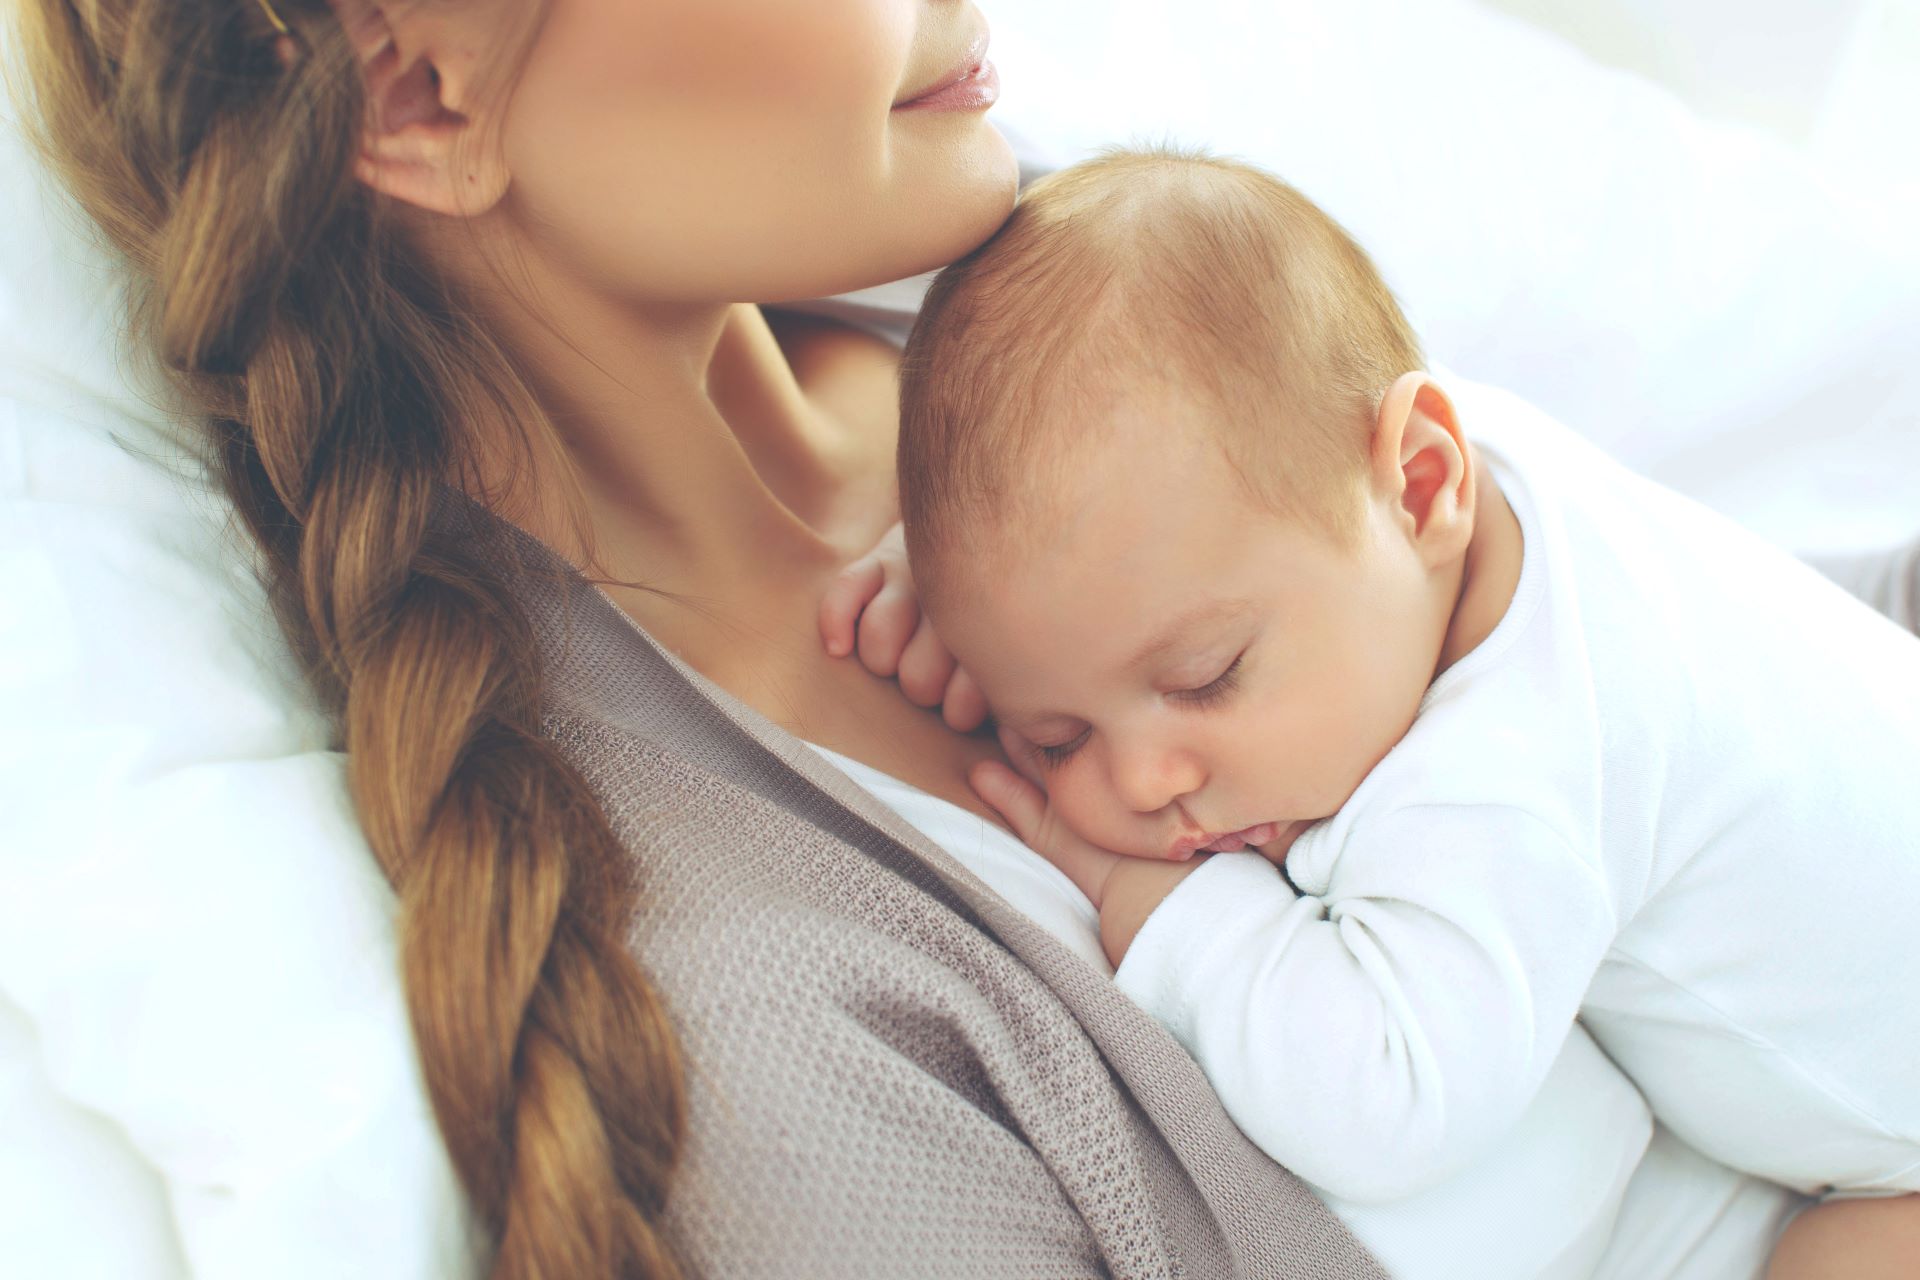 Is my baby getting enough breastmilk? 6 common reasons for low